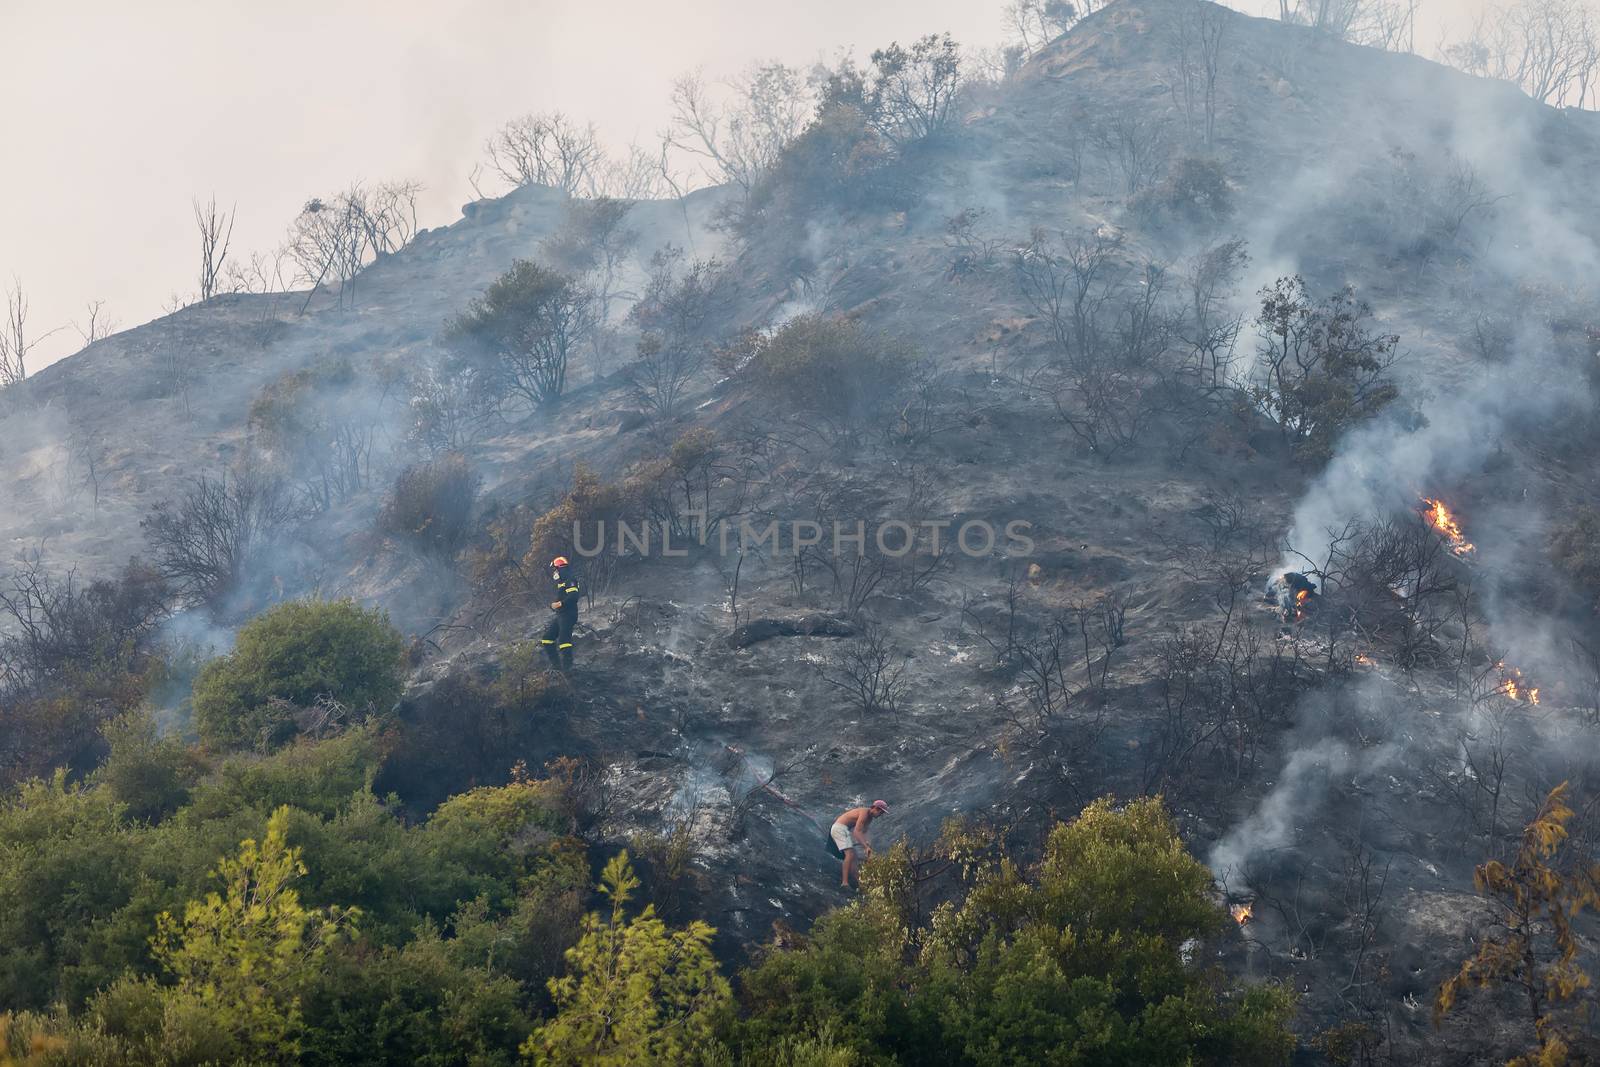 Chalkidiki, Greece - Sept 22, 2017: Burnt surface of the earth after a forest fire a fire in a pine forest in Kassandra, Halkidiki